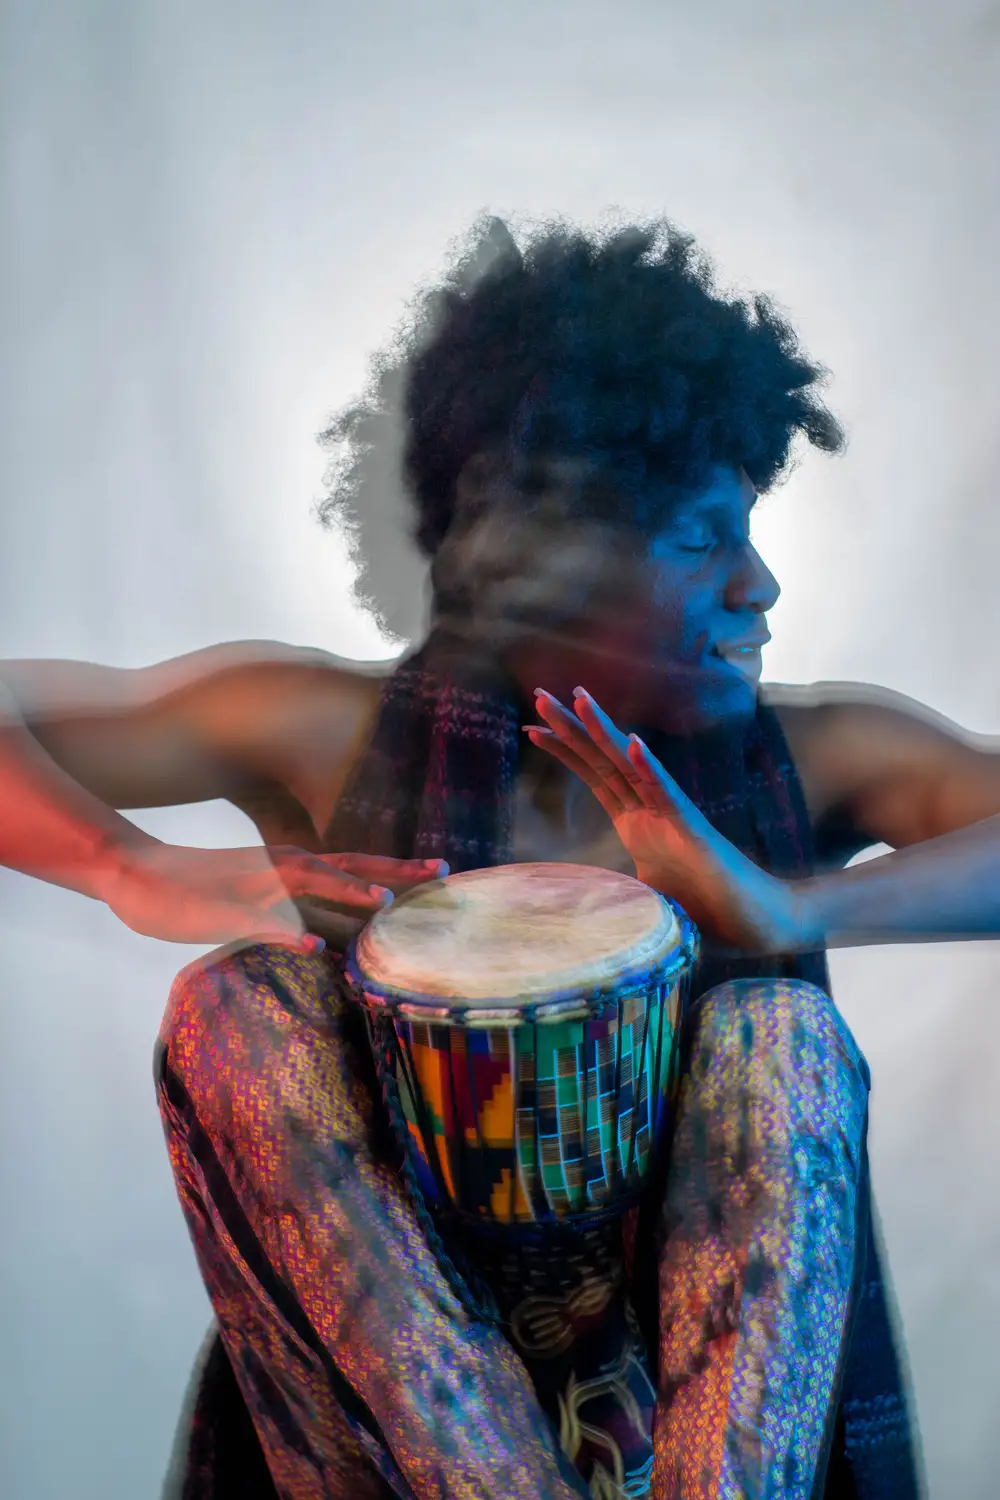 model on afro hairstyle plays his drum while looking away